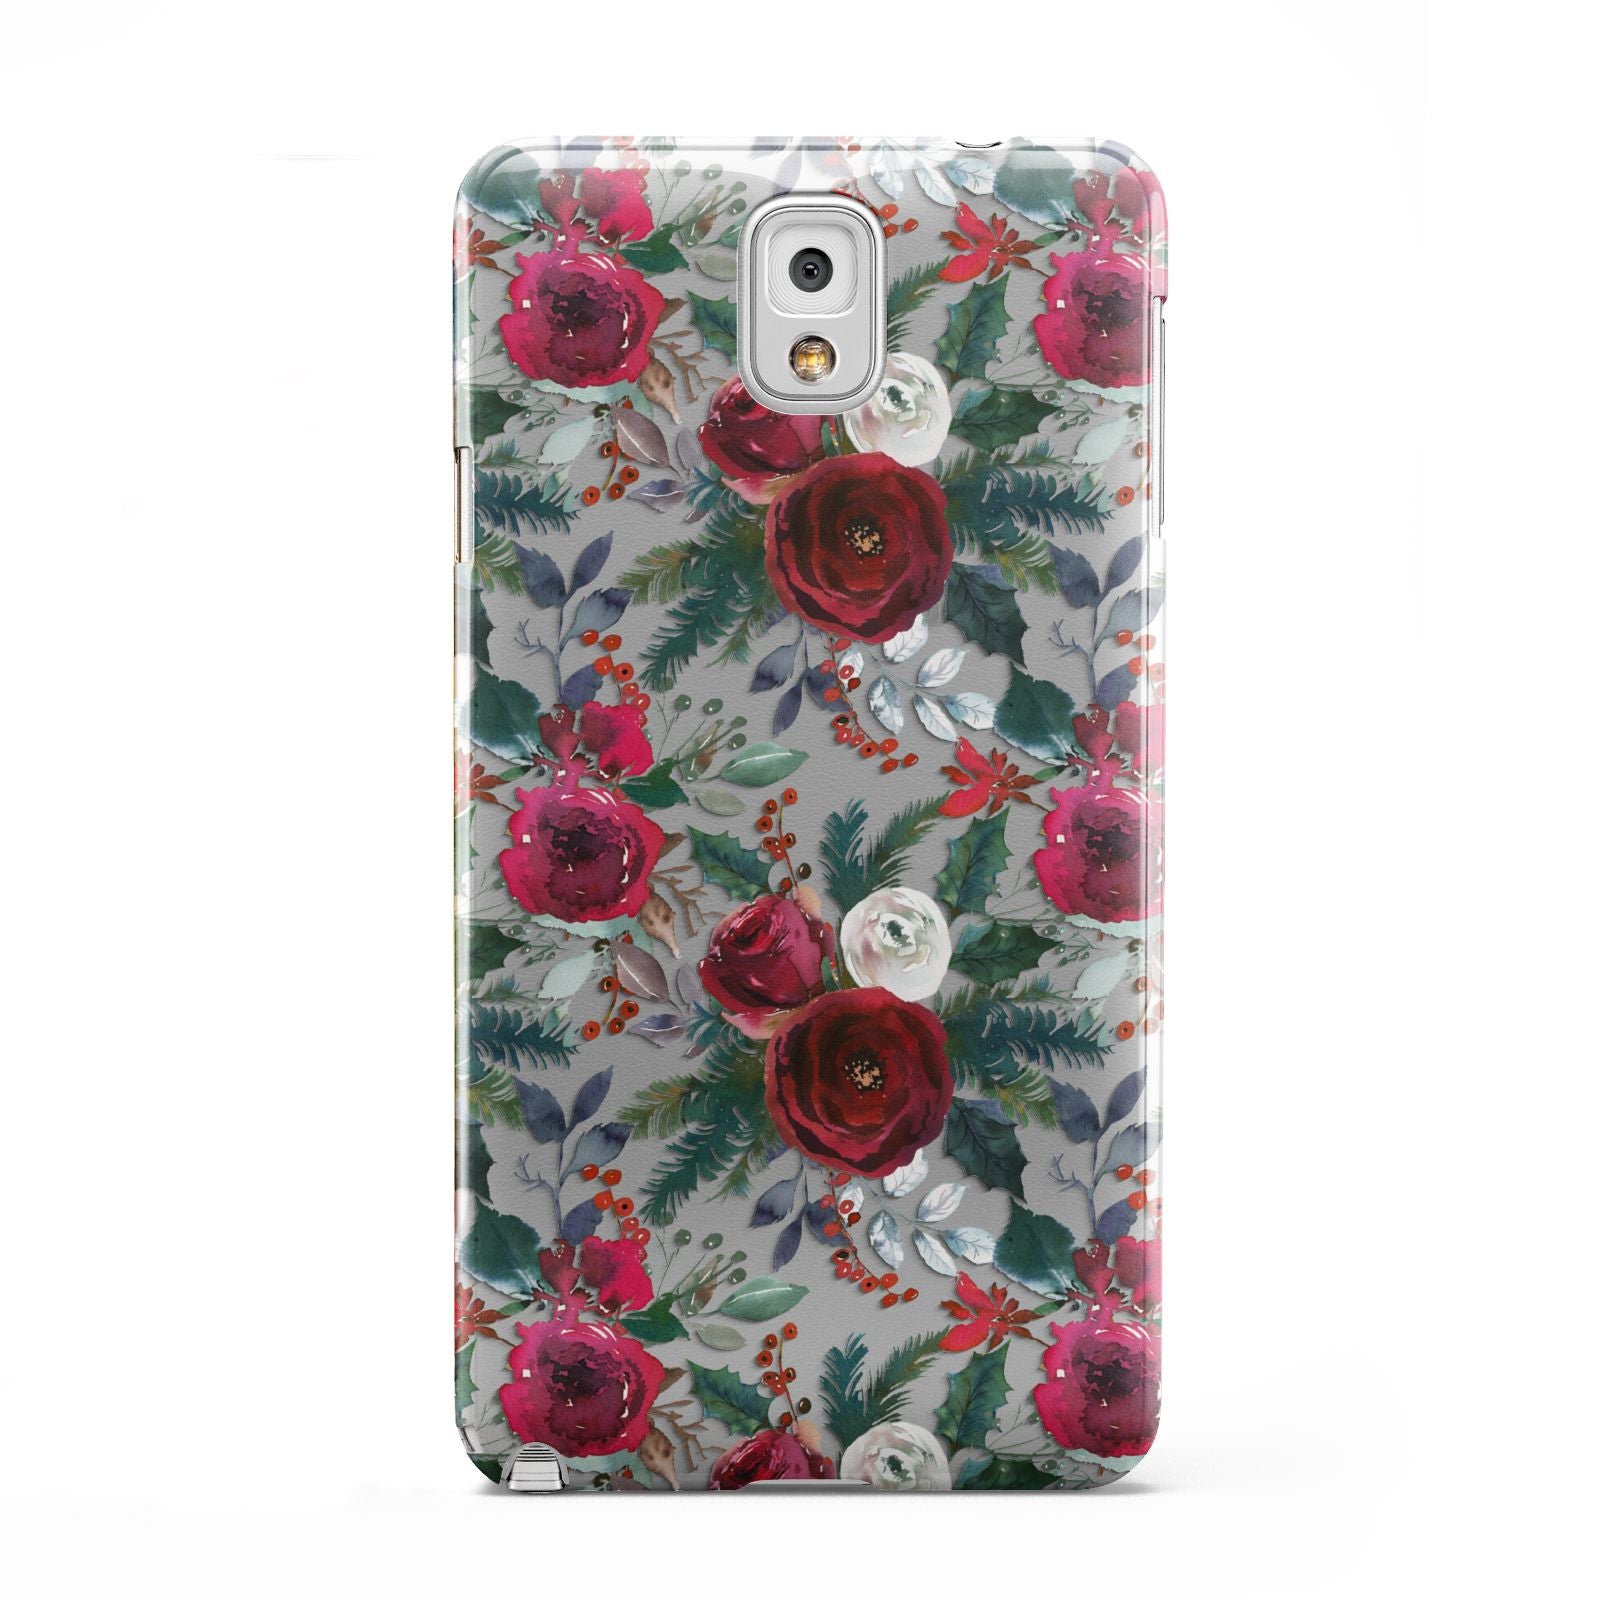 Christmas Floral Pattern Samsung Galaxy Note 3 Case